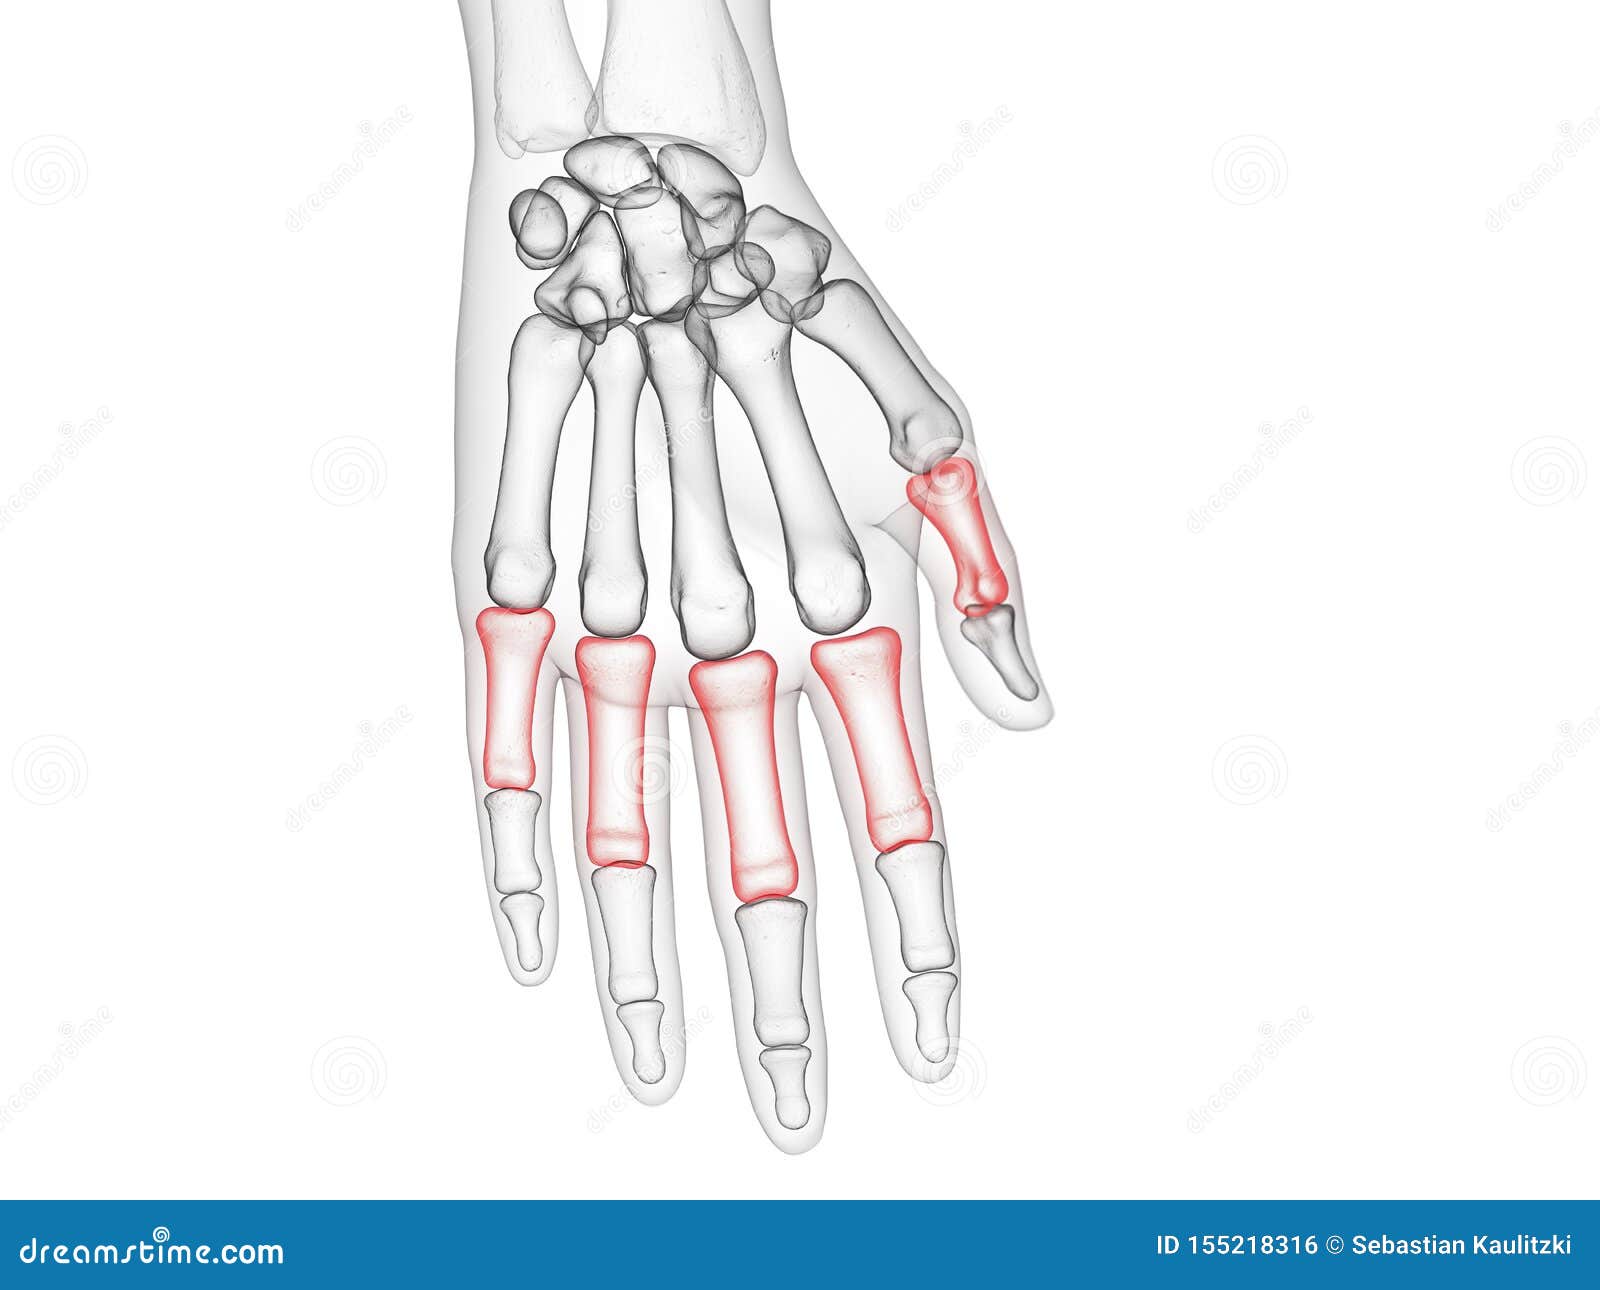 the proximal phalanges